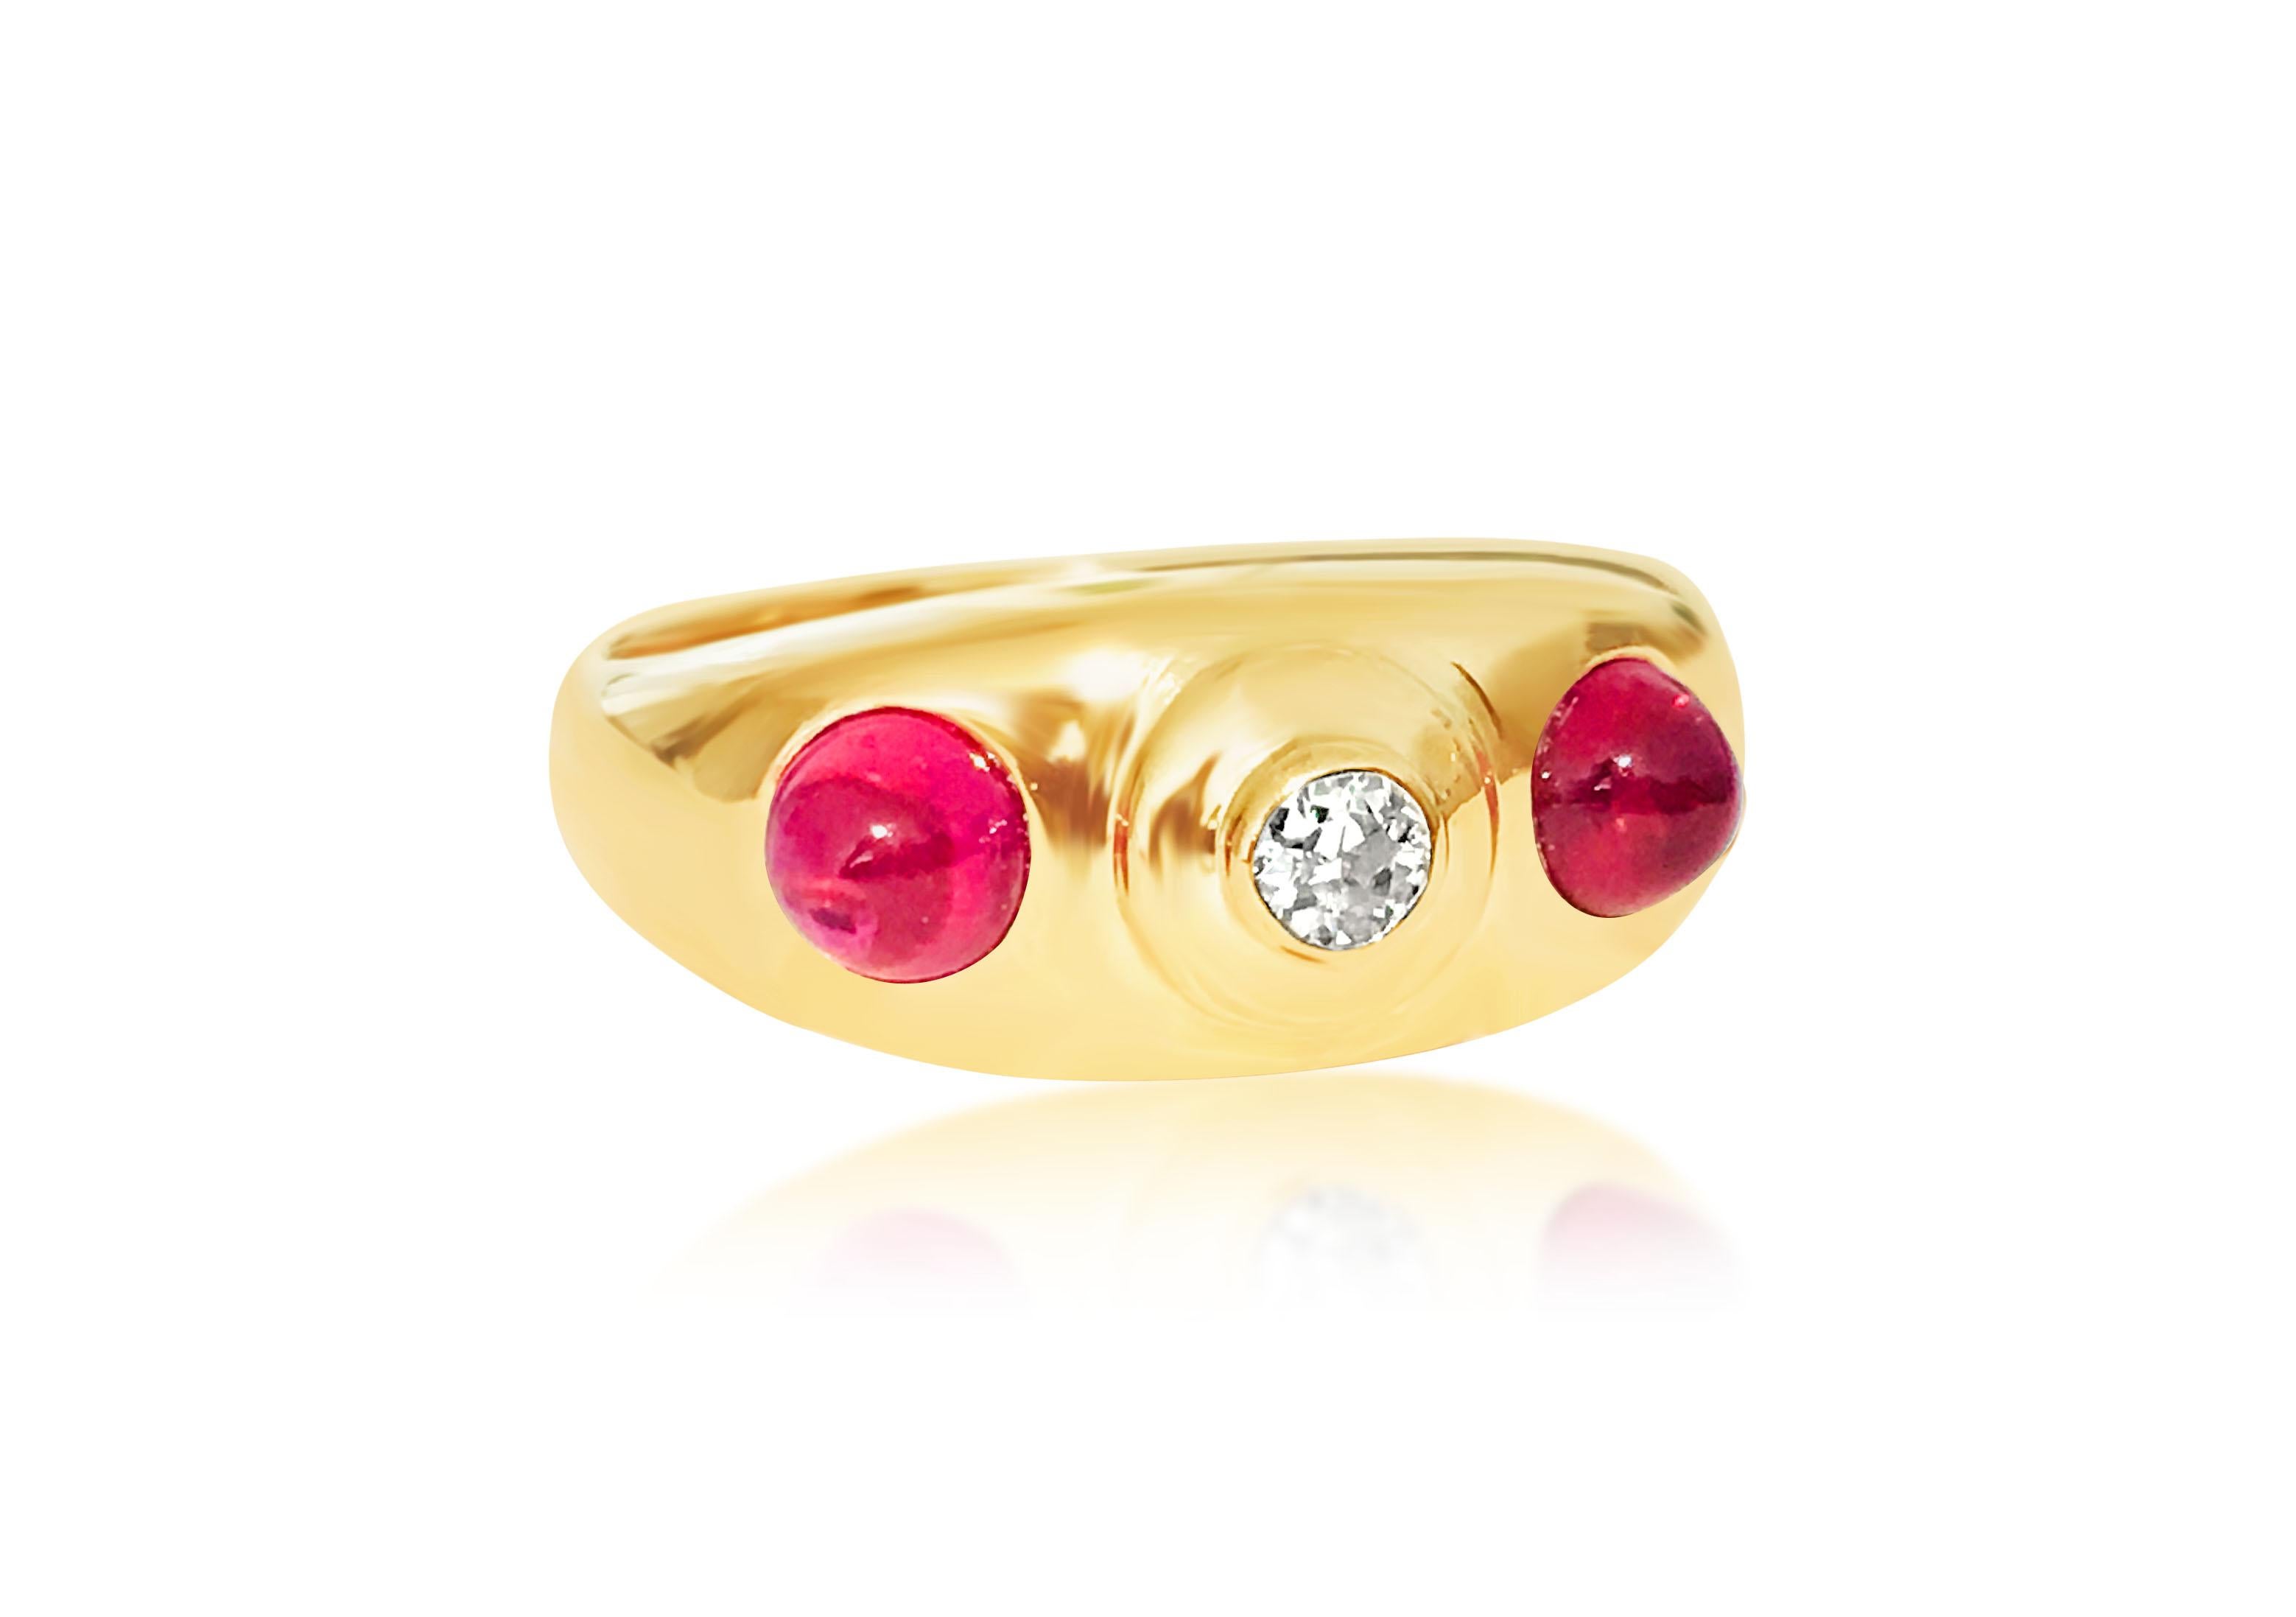 Metal: 14K yellow gold. 
0.50 carat Burma ruby. 100% natural earth mined. Cabochon cut ruby set in bezel setting. Center diamond: 0.27 carat, VS-SI clarity and G color. Round brilliant cut diamond set in bezel as well. 100% natural earth mined and